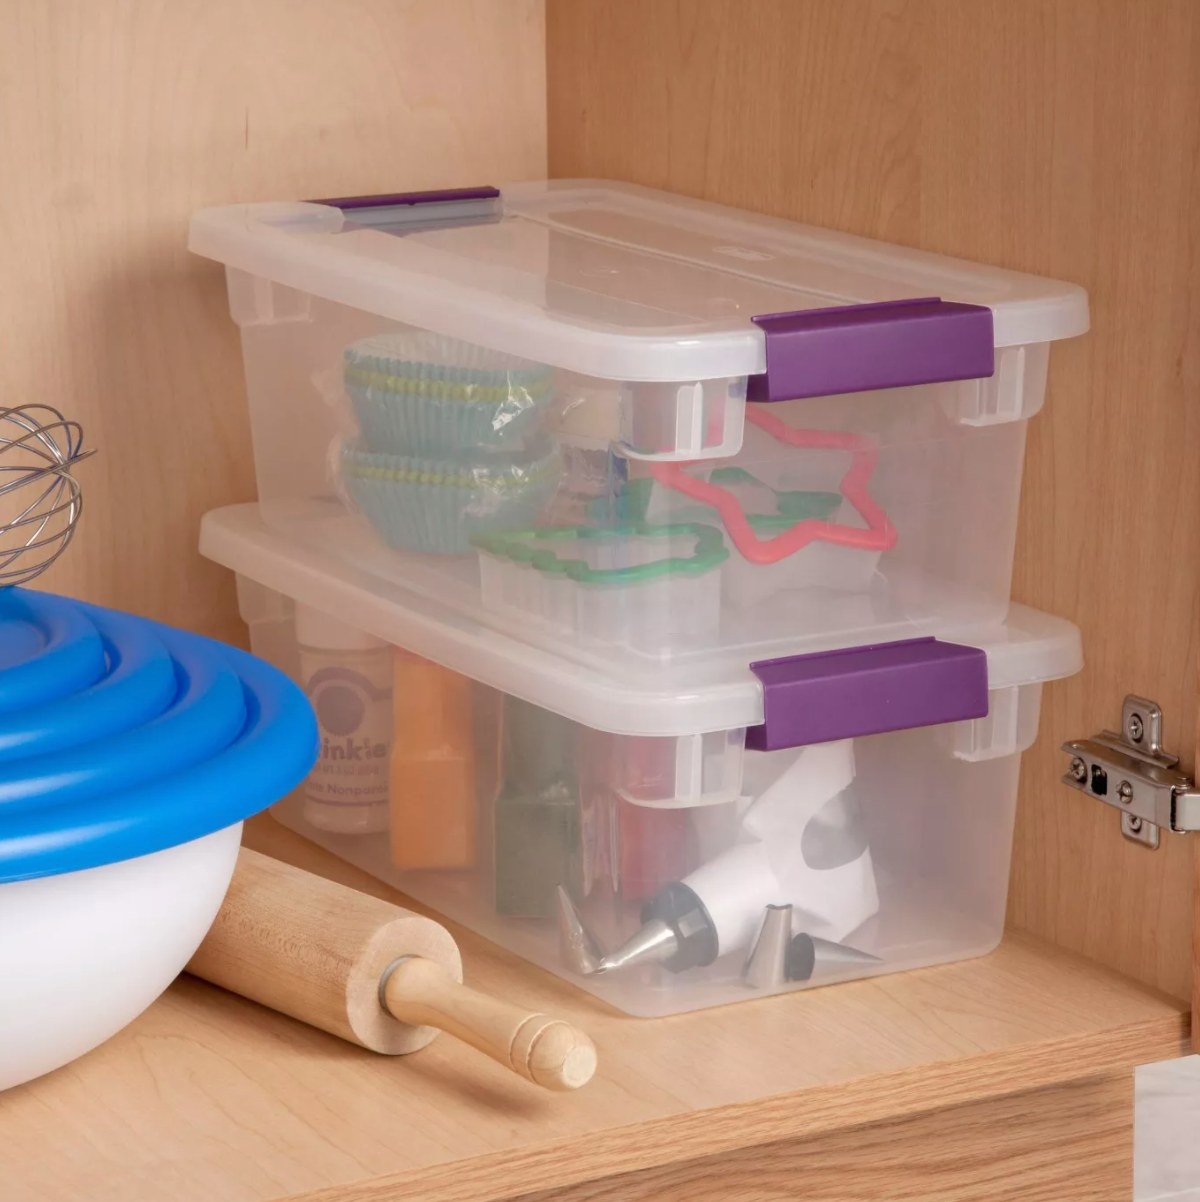 Two plastic see-through boxes with purple handles on the lids